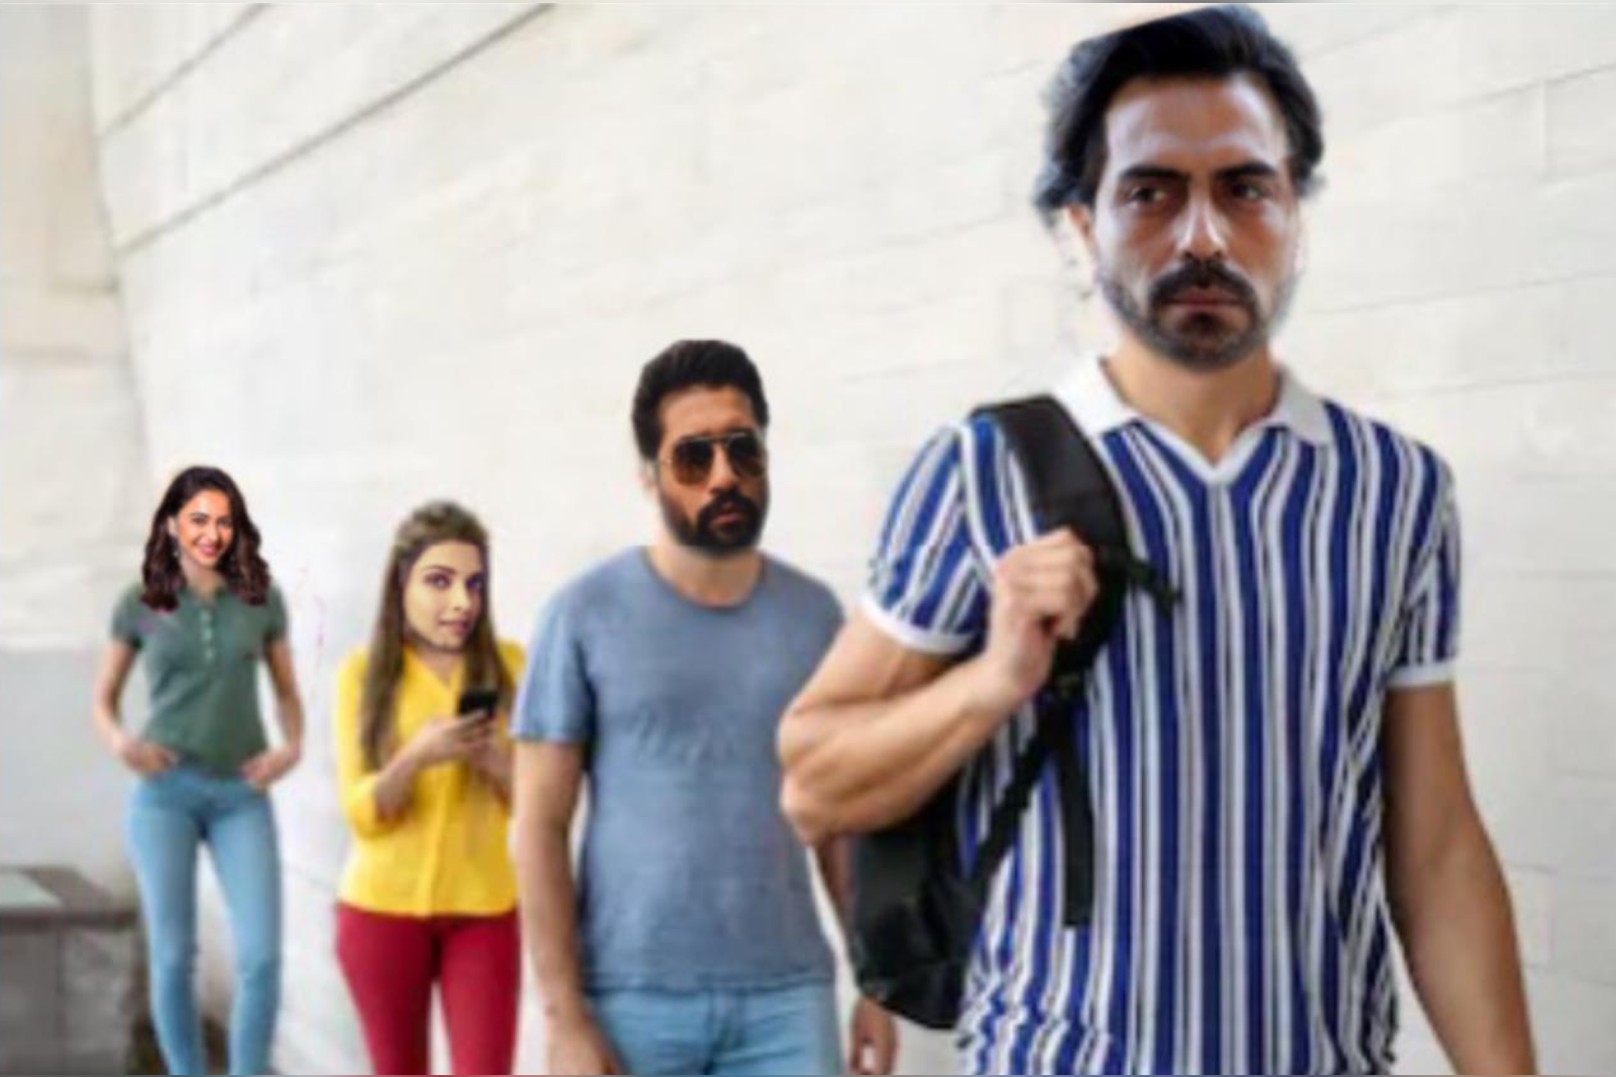 Bollywood Celebrities Queue Up For Vaccination After Rumours Say The Vaccine Has Side Effects Smiliar To Drugs